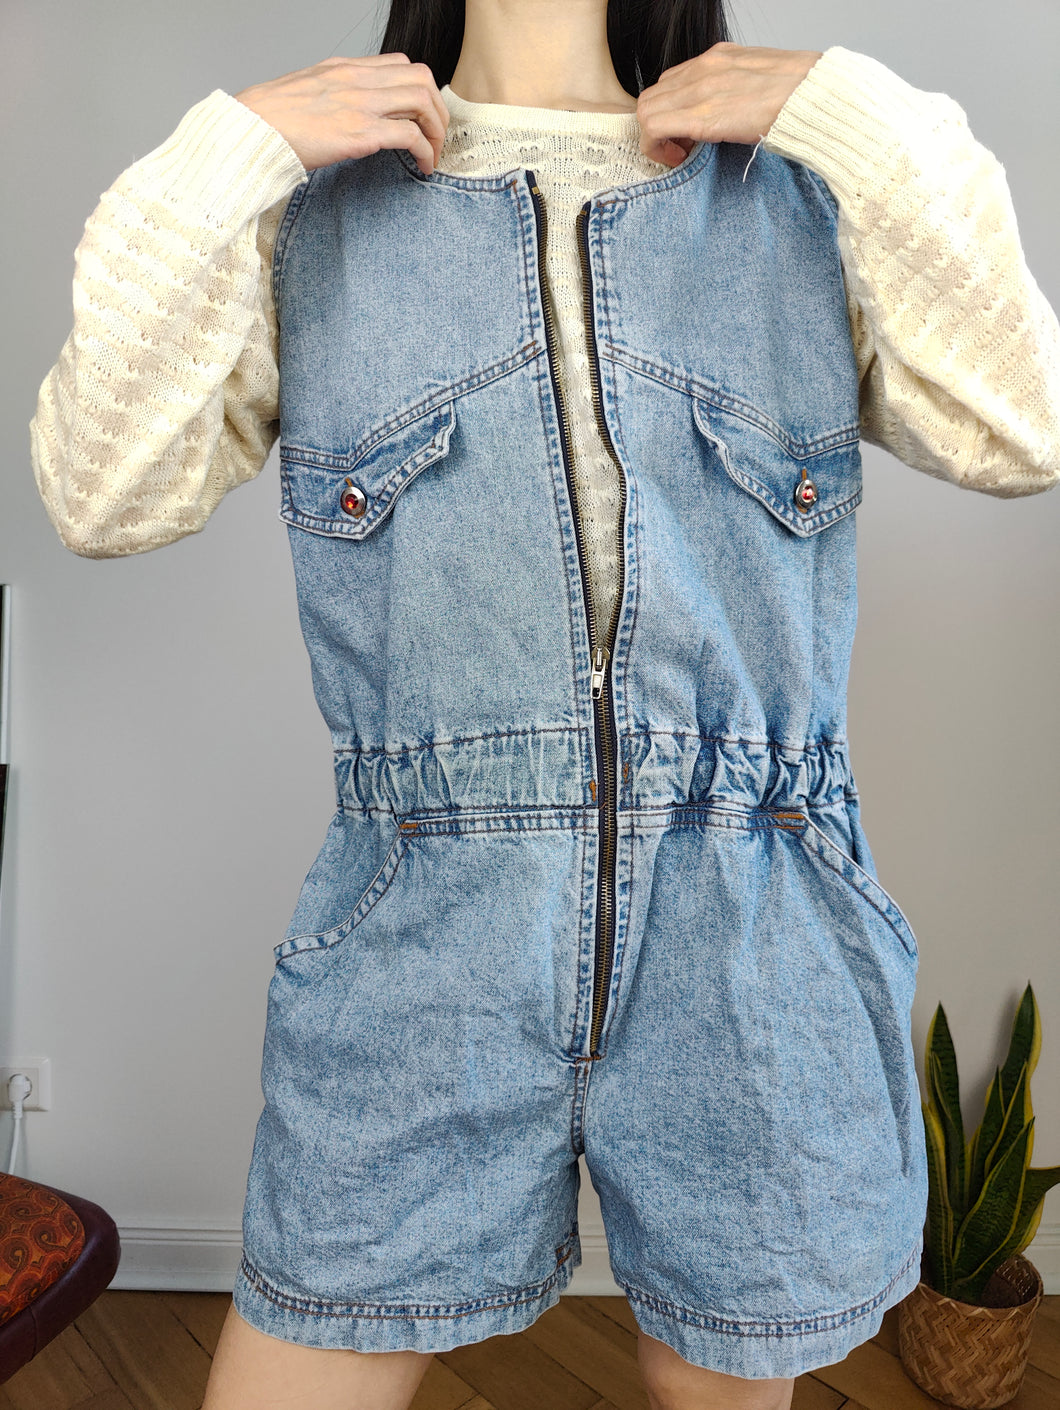 Vintage denim dungaree jeans blue shorts overall jumpsuit Squaw made in Italy women M